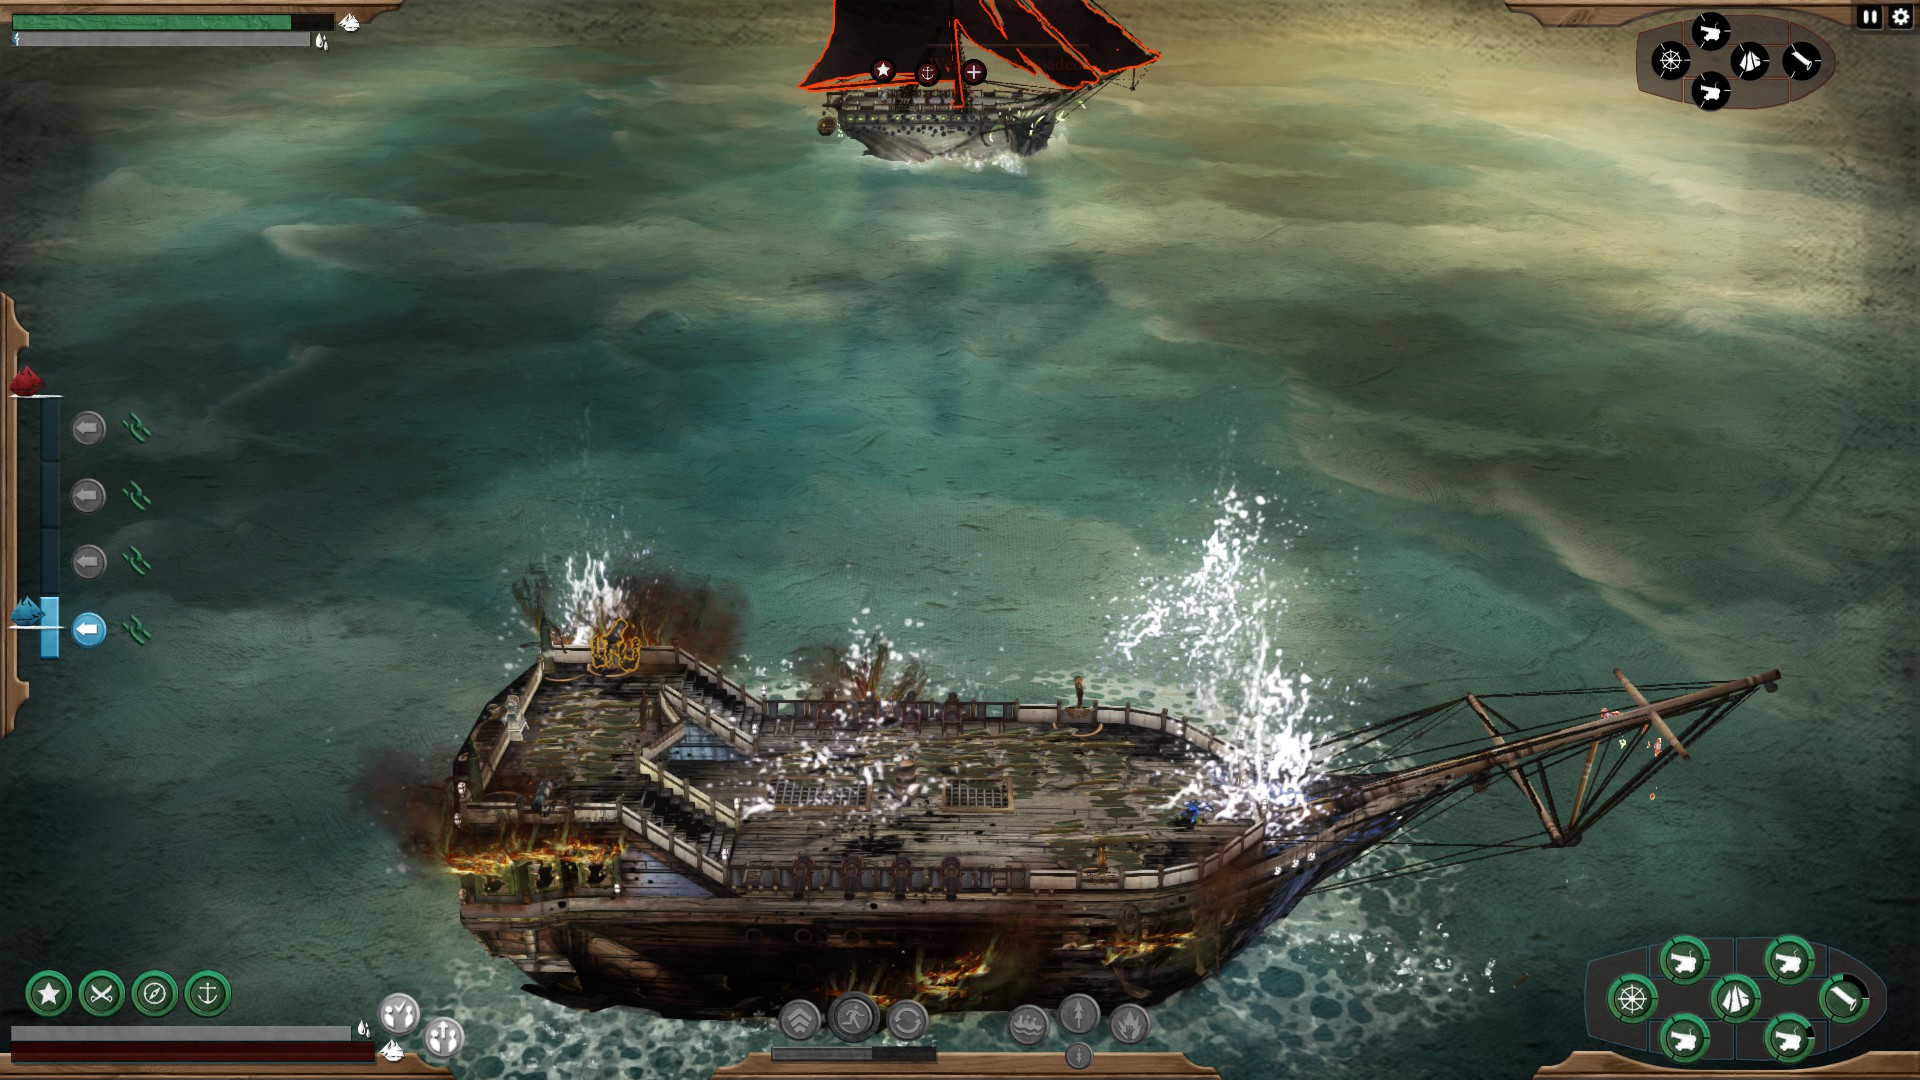 Abandon Ship Lowers Sails and Launches Tomorrow